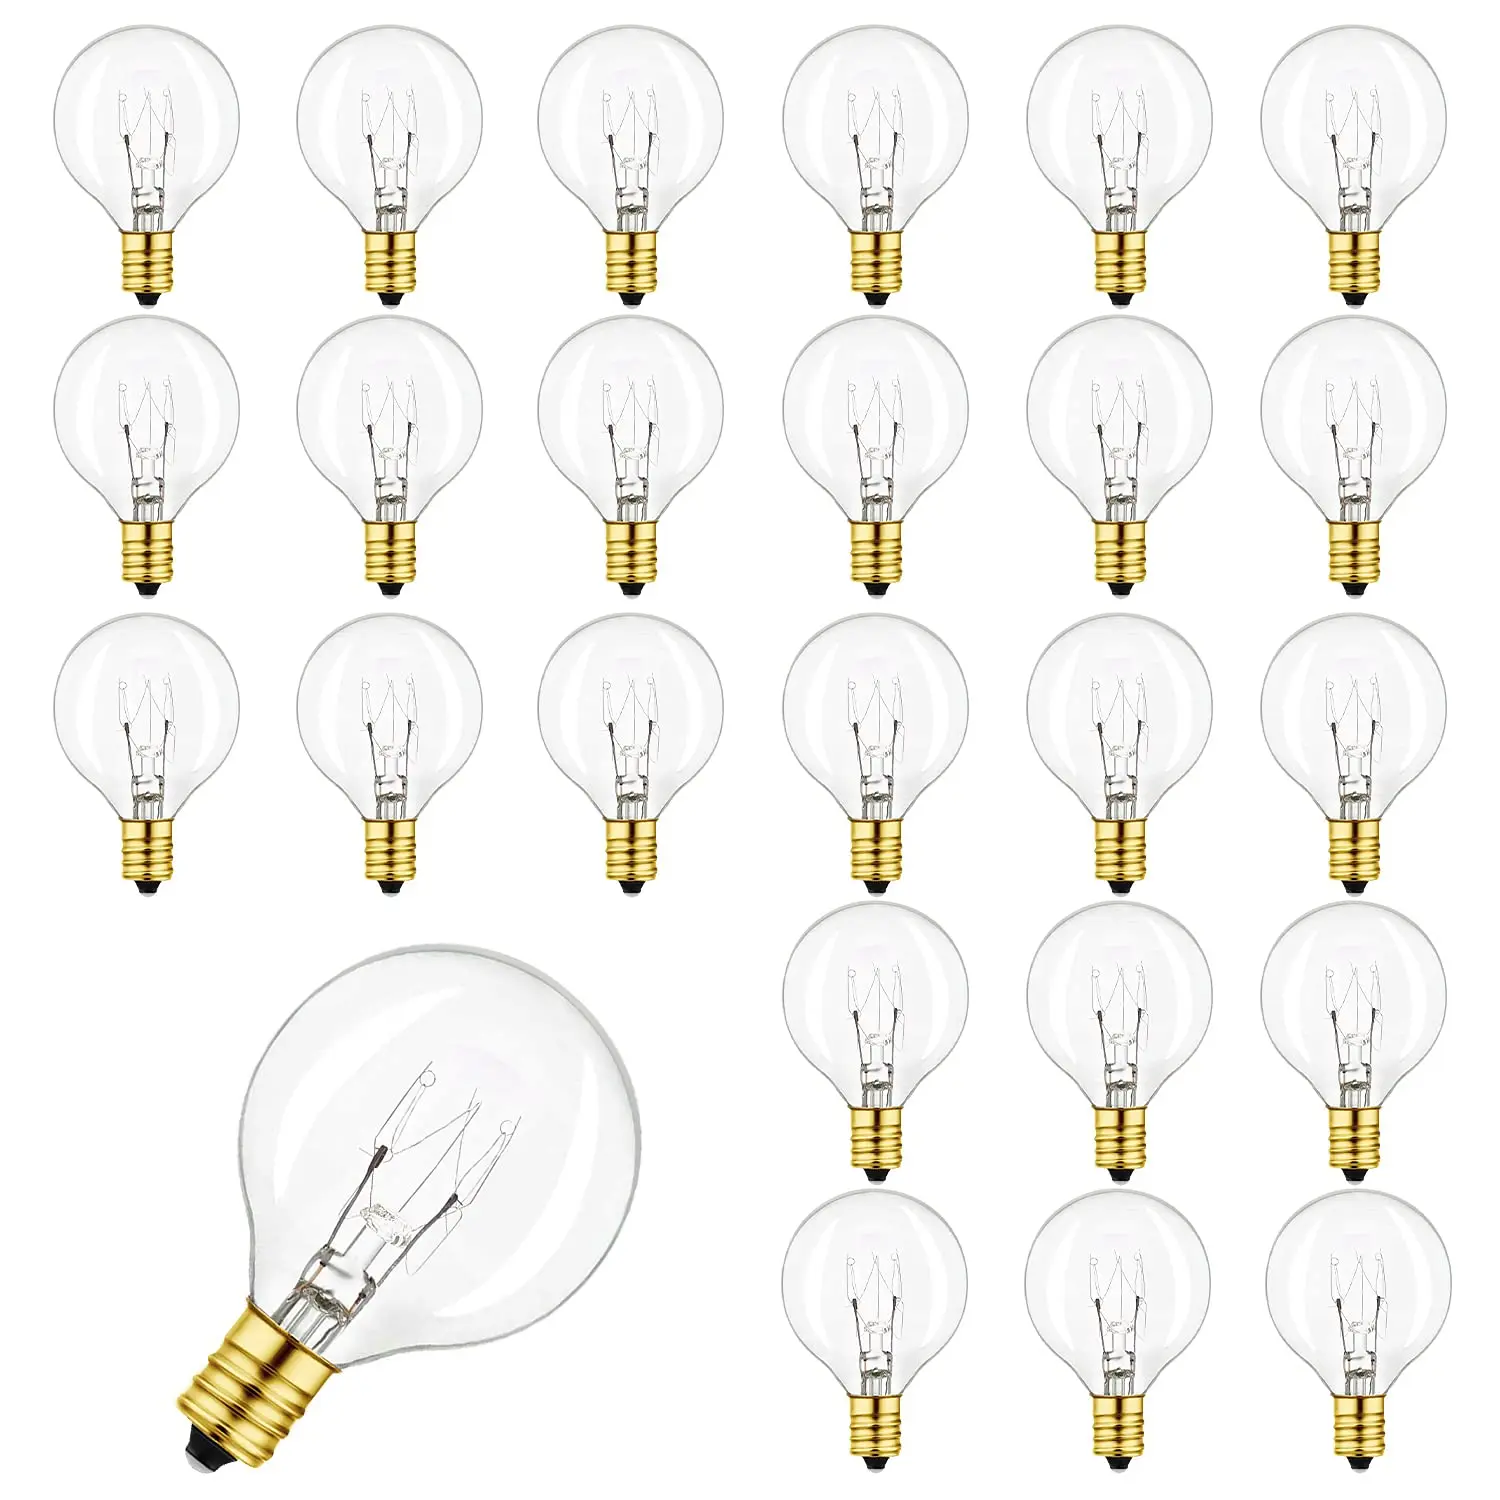 25pcs G40 7W Clear Tungsten Edison Bulbs Replacement Light Bulbs E12 2200K Warm White for Patio Lighting Decoration Wedding